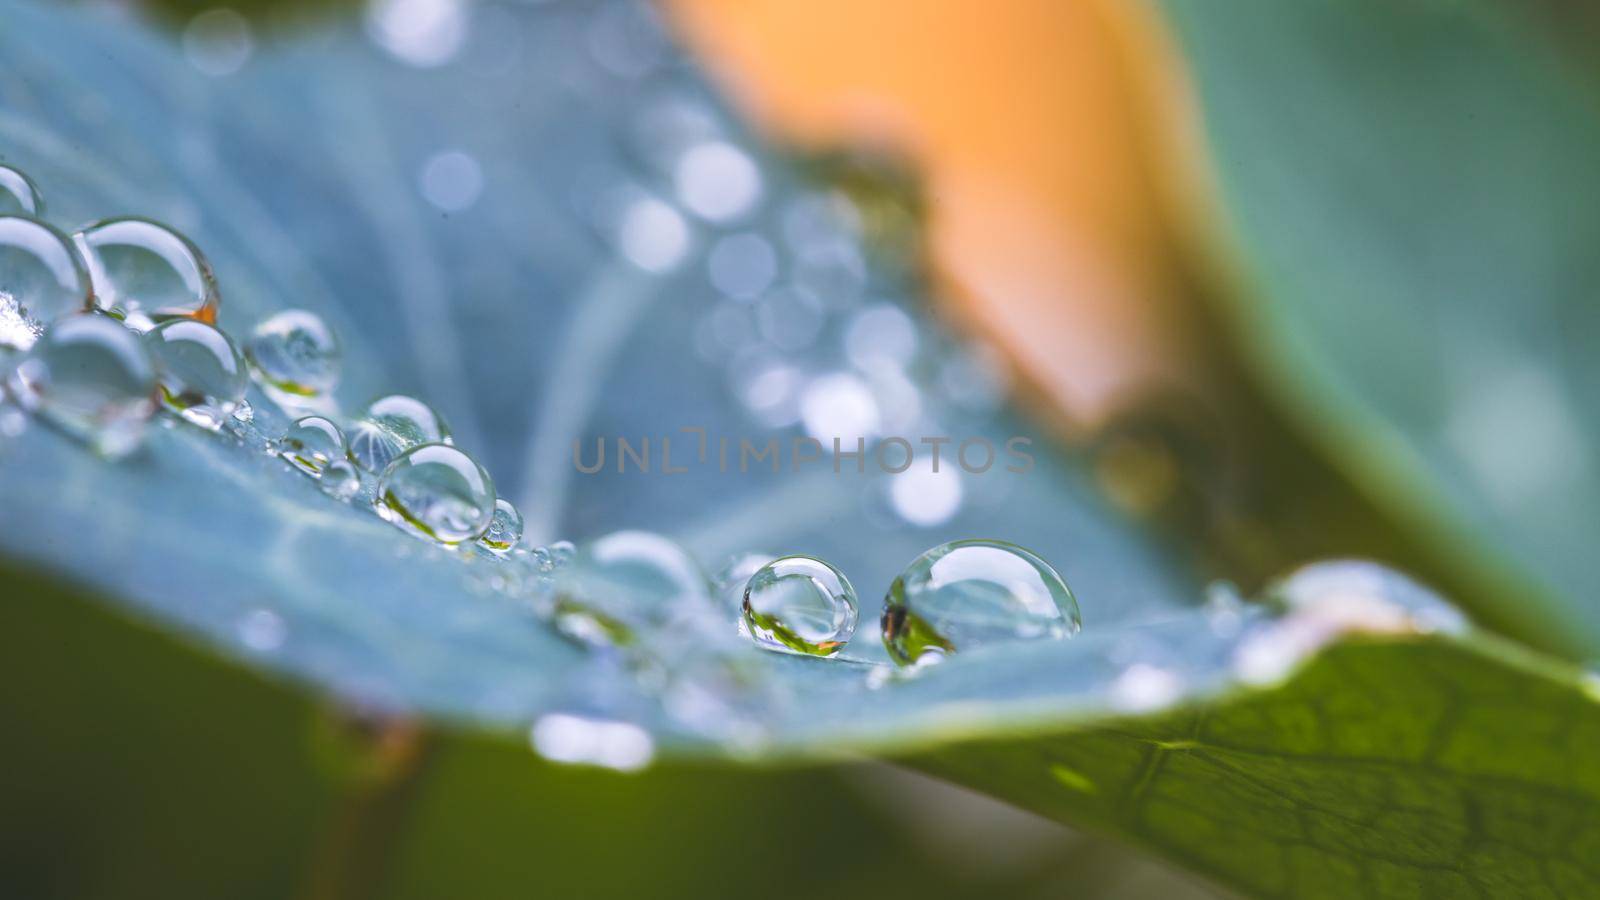 Environment, freshness and nature concept: Macro of big waterdrops on green leaf after rain. Beautiful leaf texture. by Daxenbichler